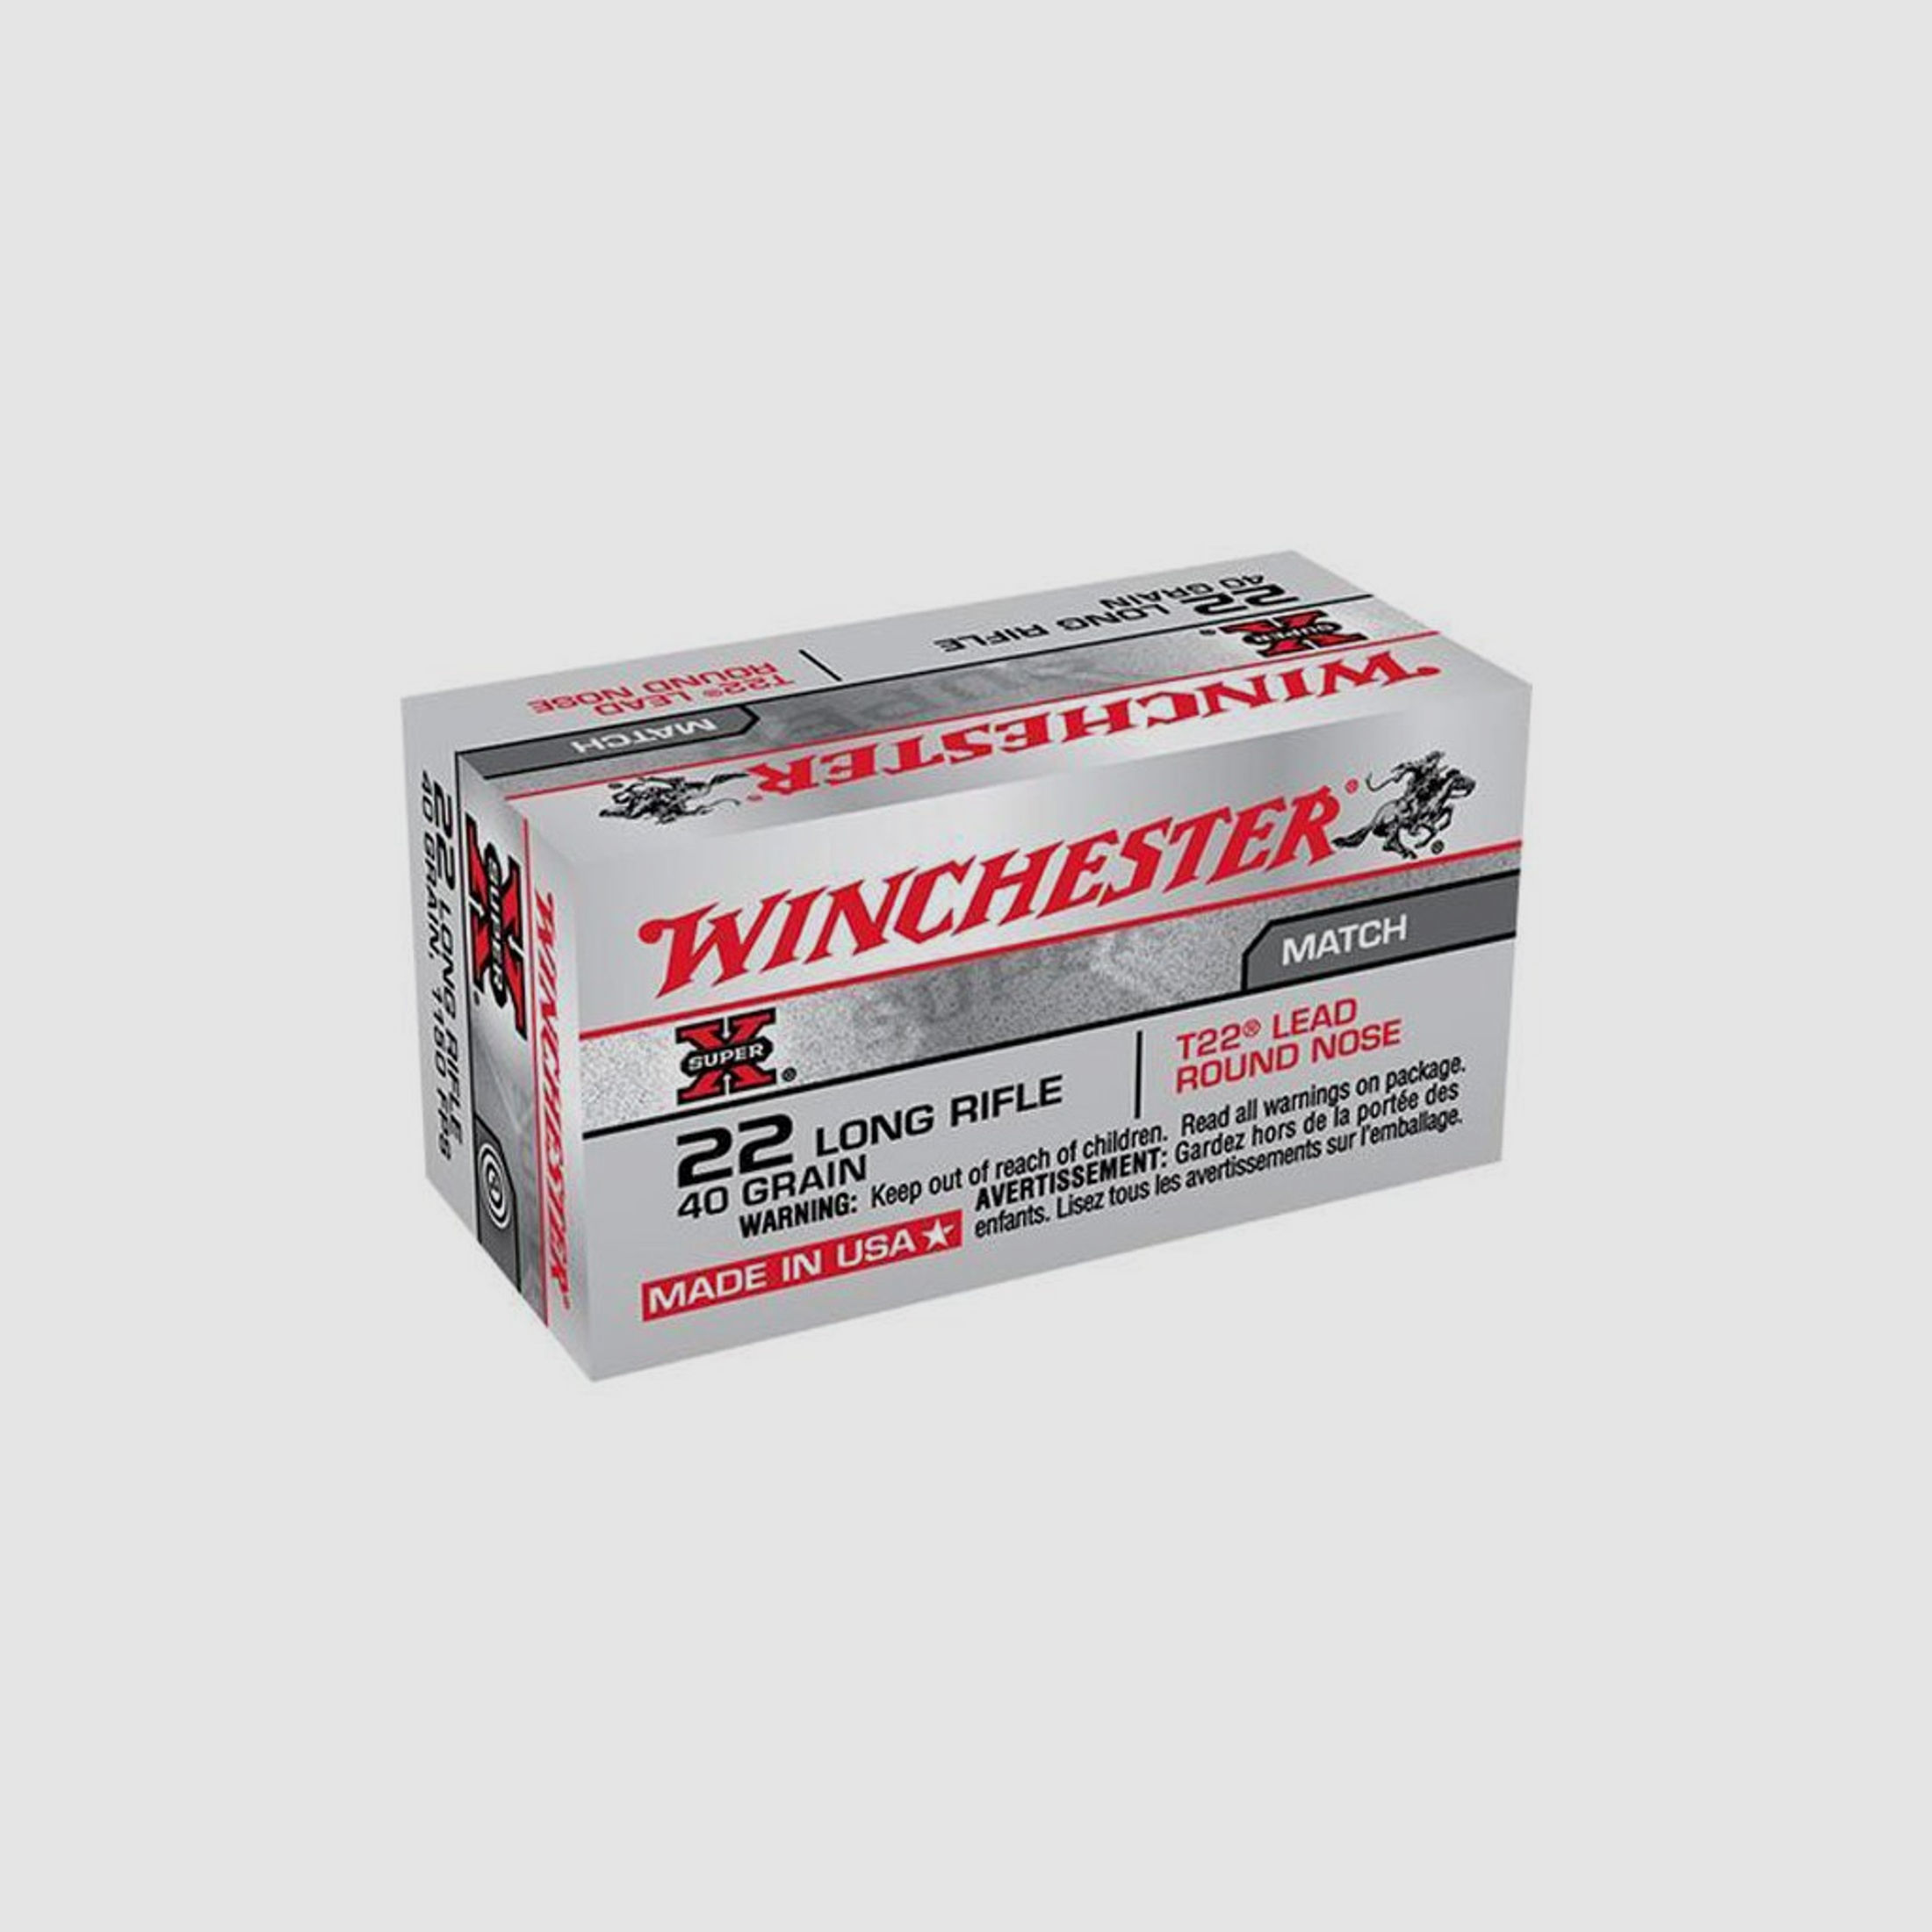 WINCHESTER .22lr Lead Round Nose T22